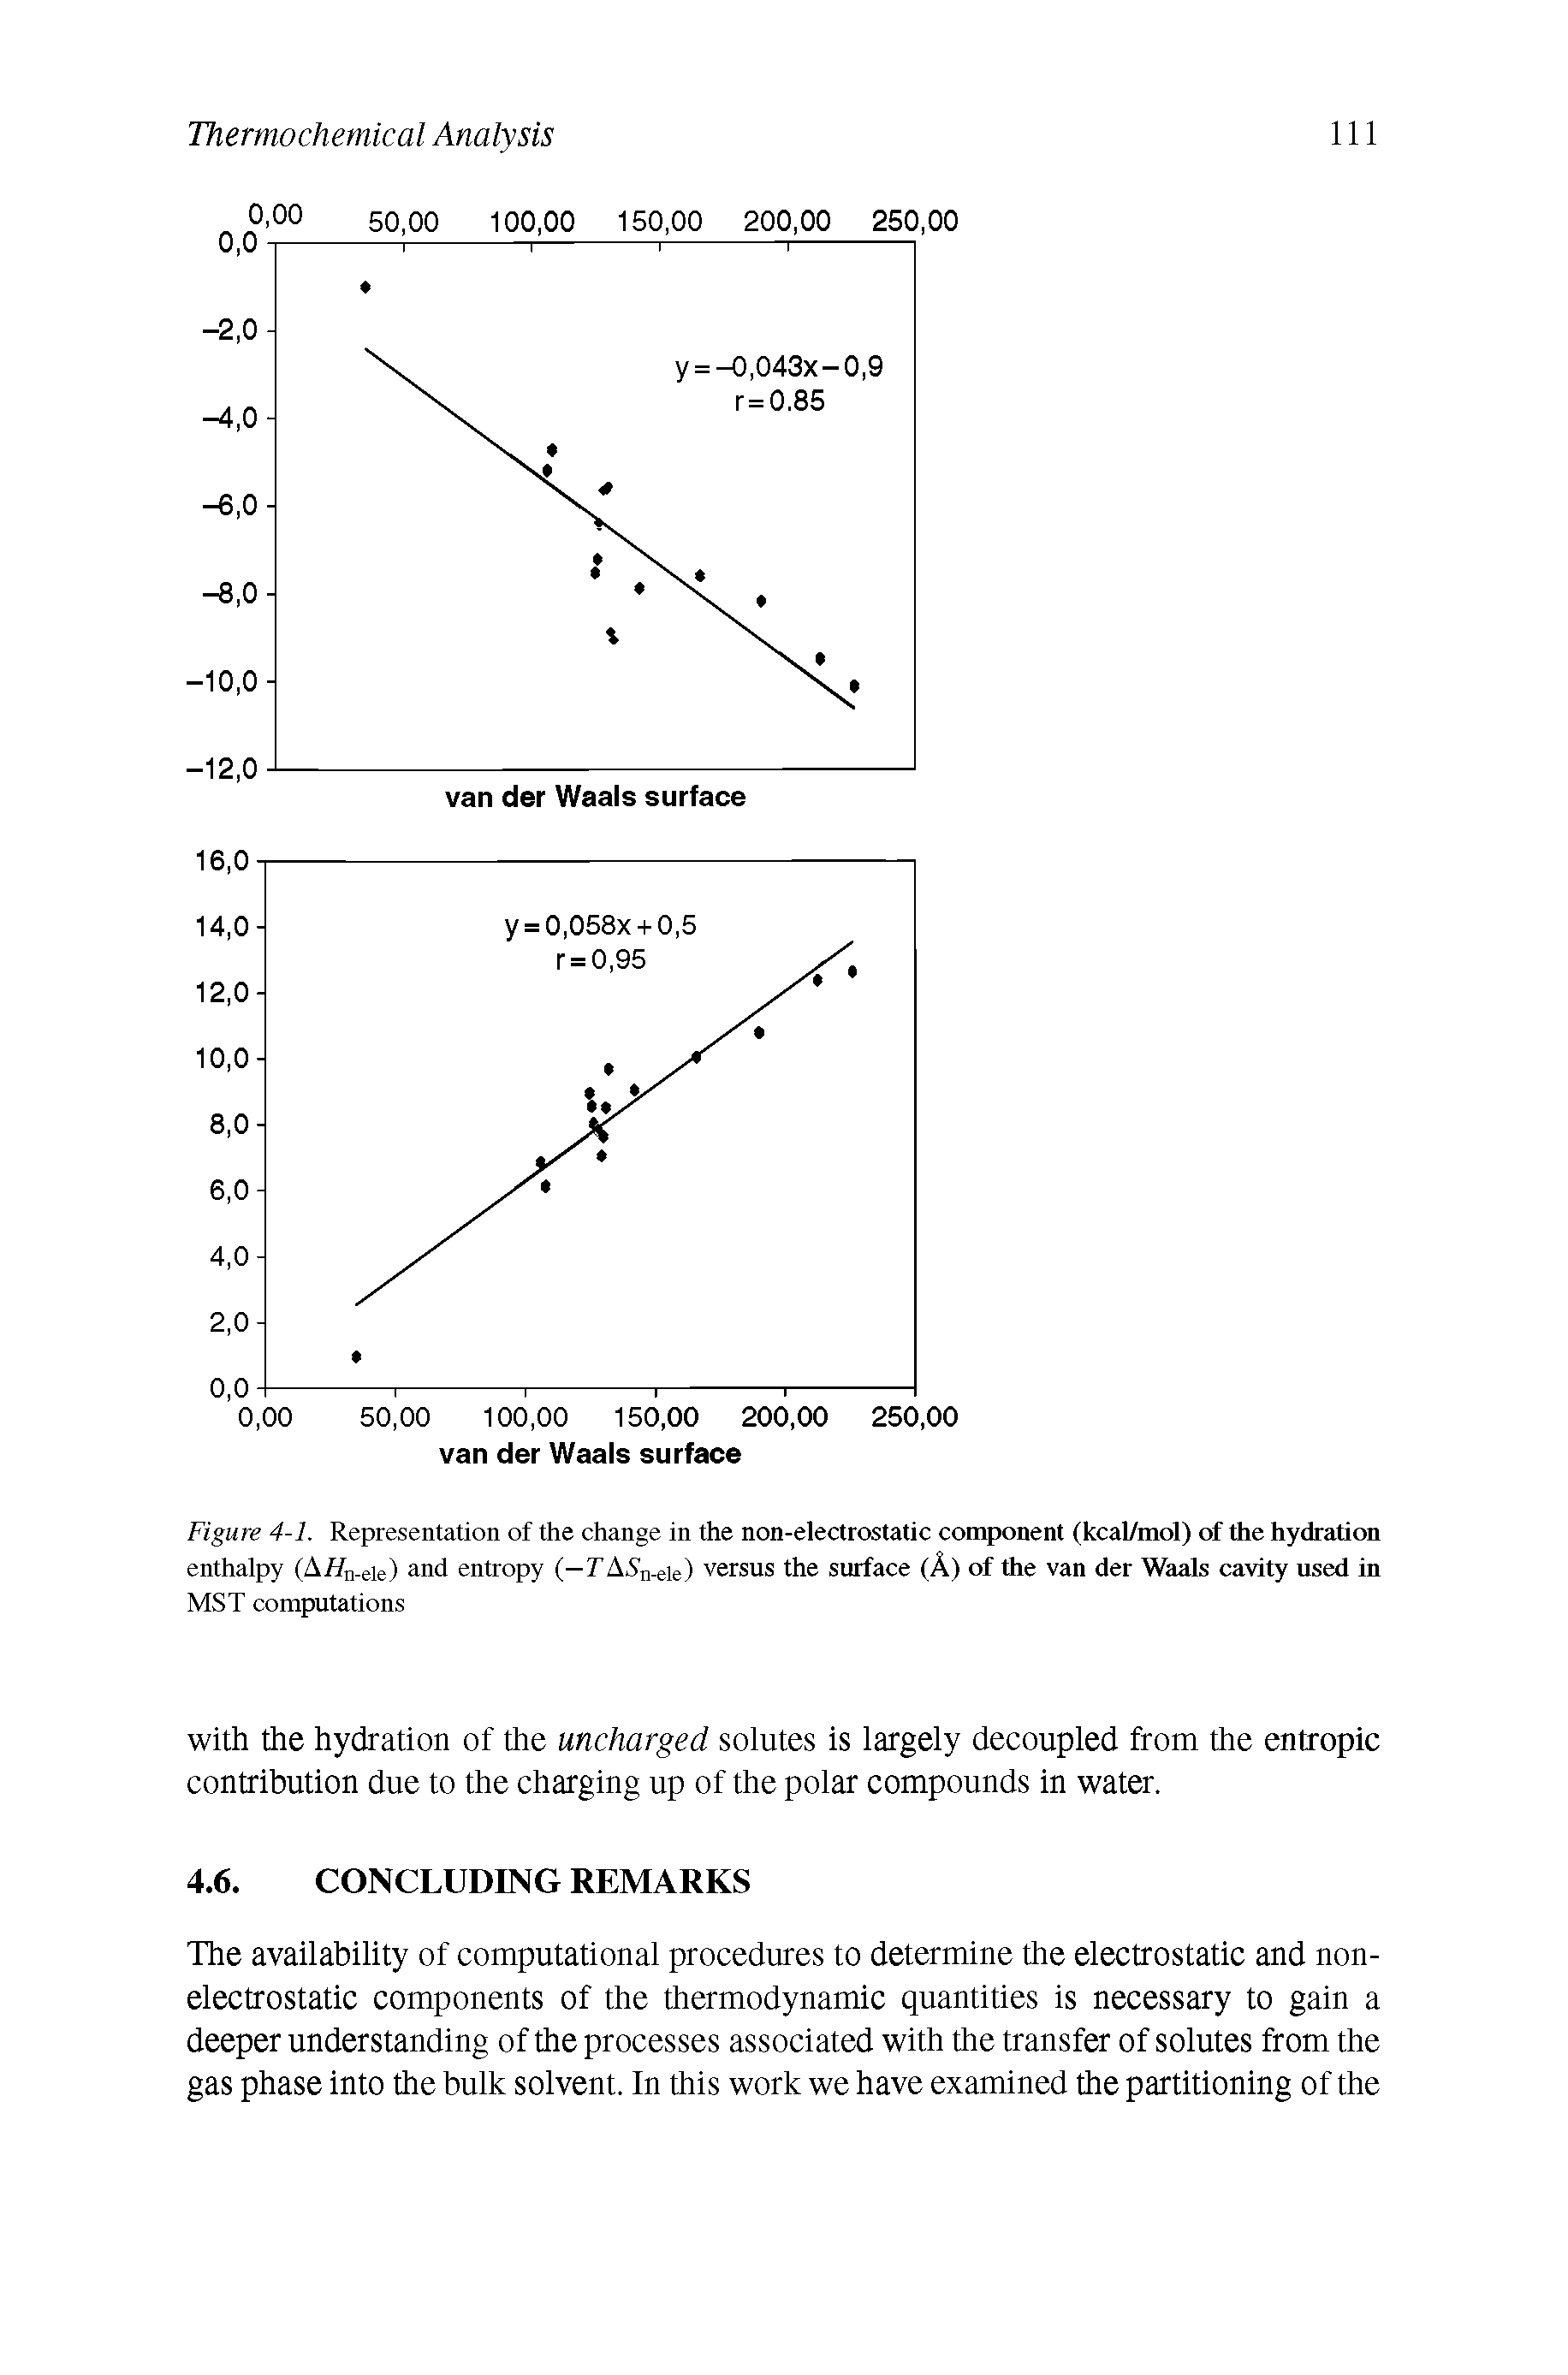 Figure 4-1. Representation of the change in the non-electrostatic component (kcal/mol) of the hydration enthalpy (A//n.eie) and entropy (-TAAn.eie) versus the surface (A) of the van der Waals cavity used in MST computations...